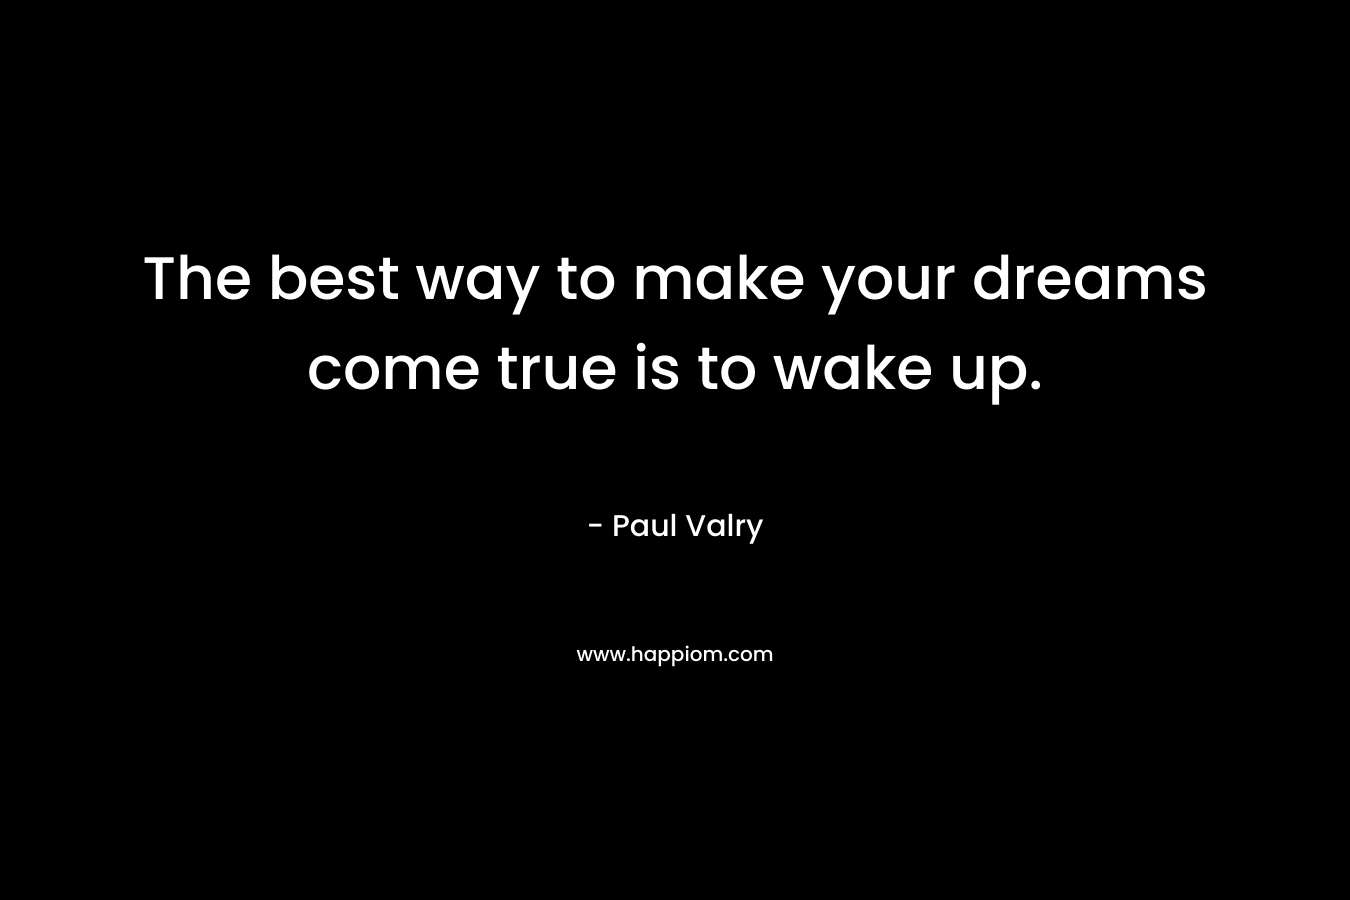 The best way to make your dreams come true is to wake up. – Paul Valry